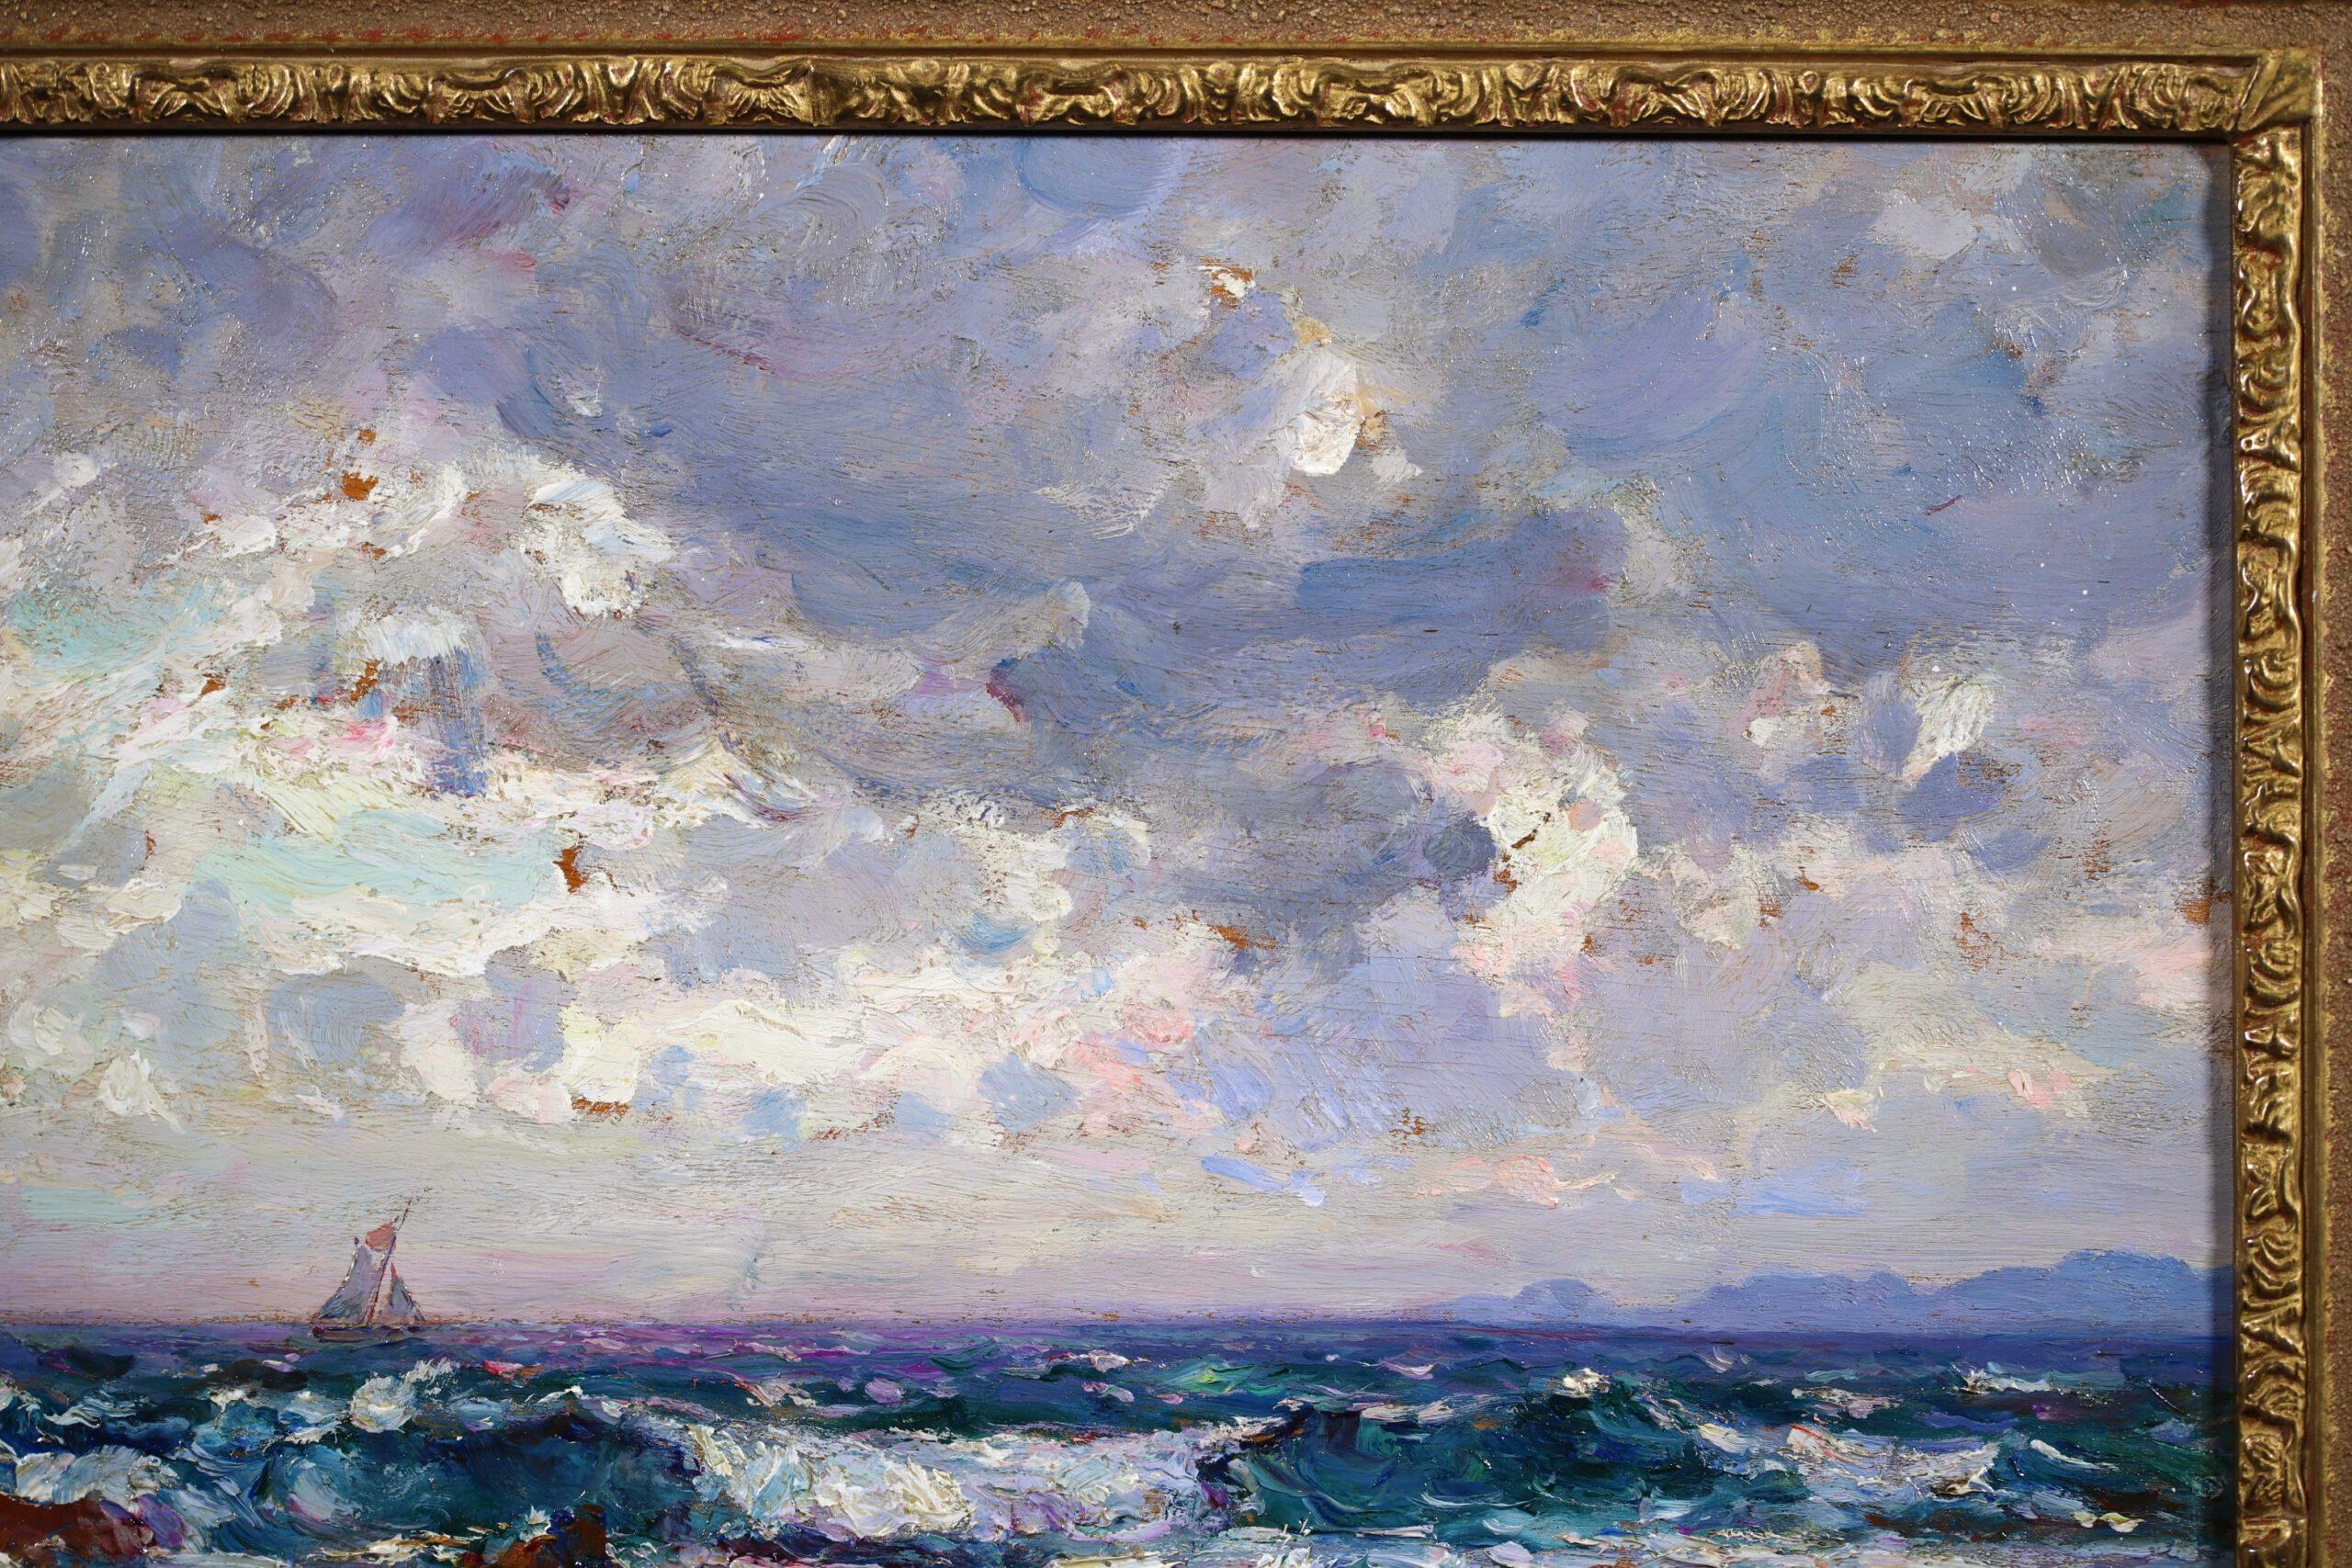 La Pointe-Rouge - Post Impressionist Sea Landscape Oil by Louis Gaussen - Post-Impressionist Painting by Adolphe Louis Gaussen